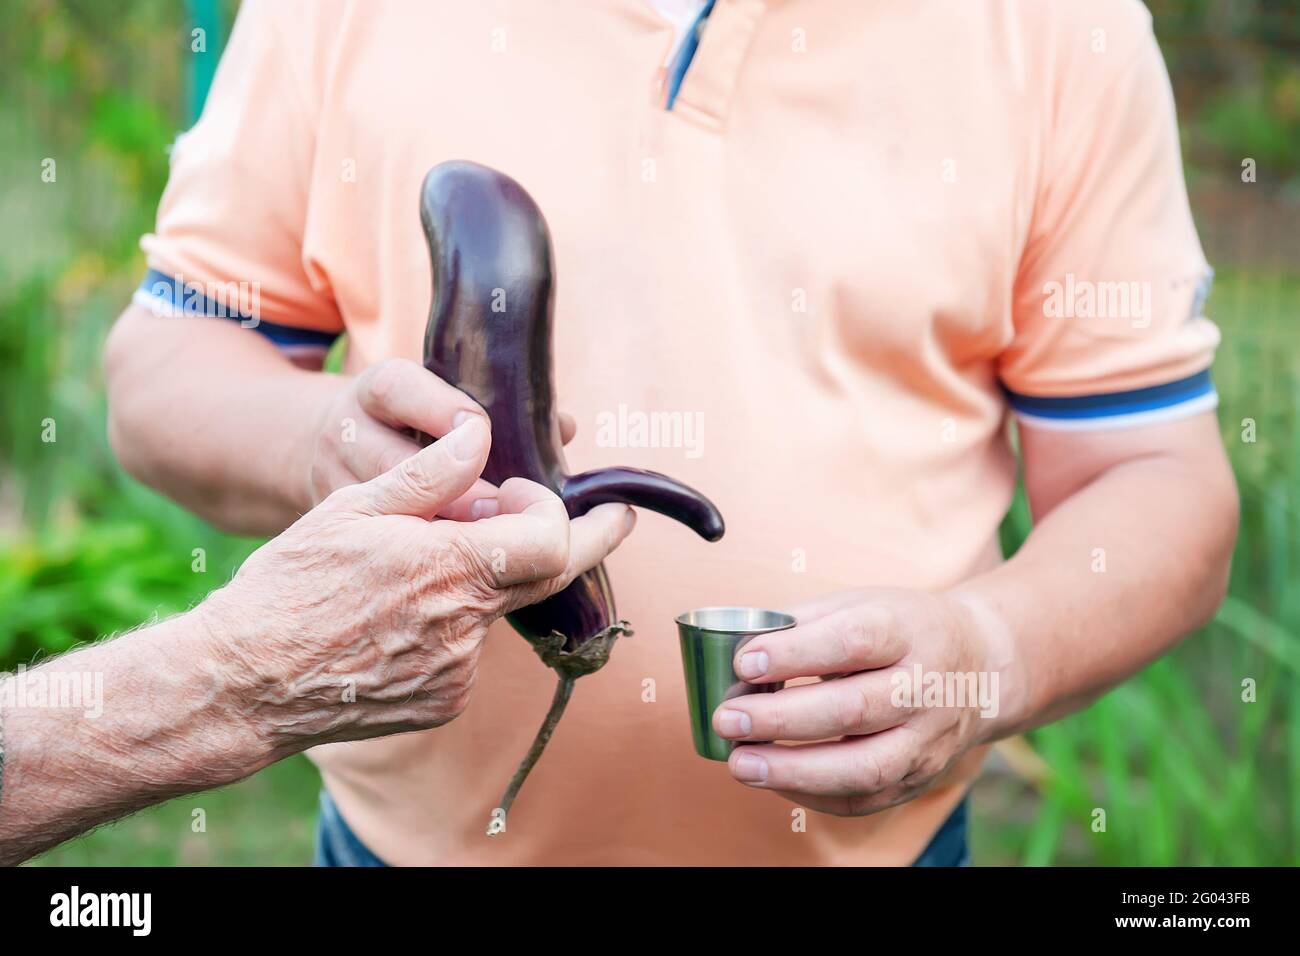 garden grew funny eggplant-mutants of unusual shape. man holds funny, deformed vegetables in his hands. concept of erectile dysfunction and urinary re Stock Photo